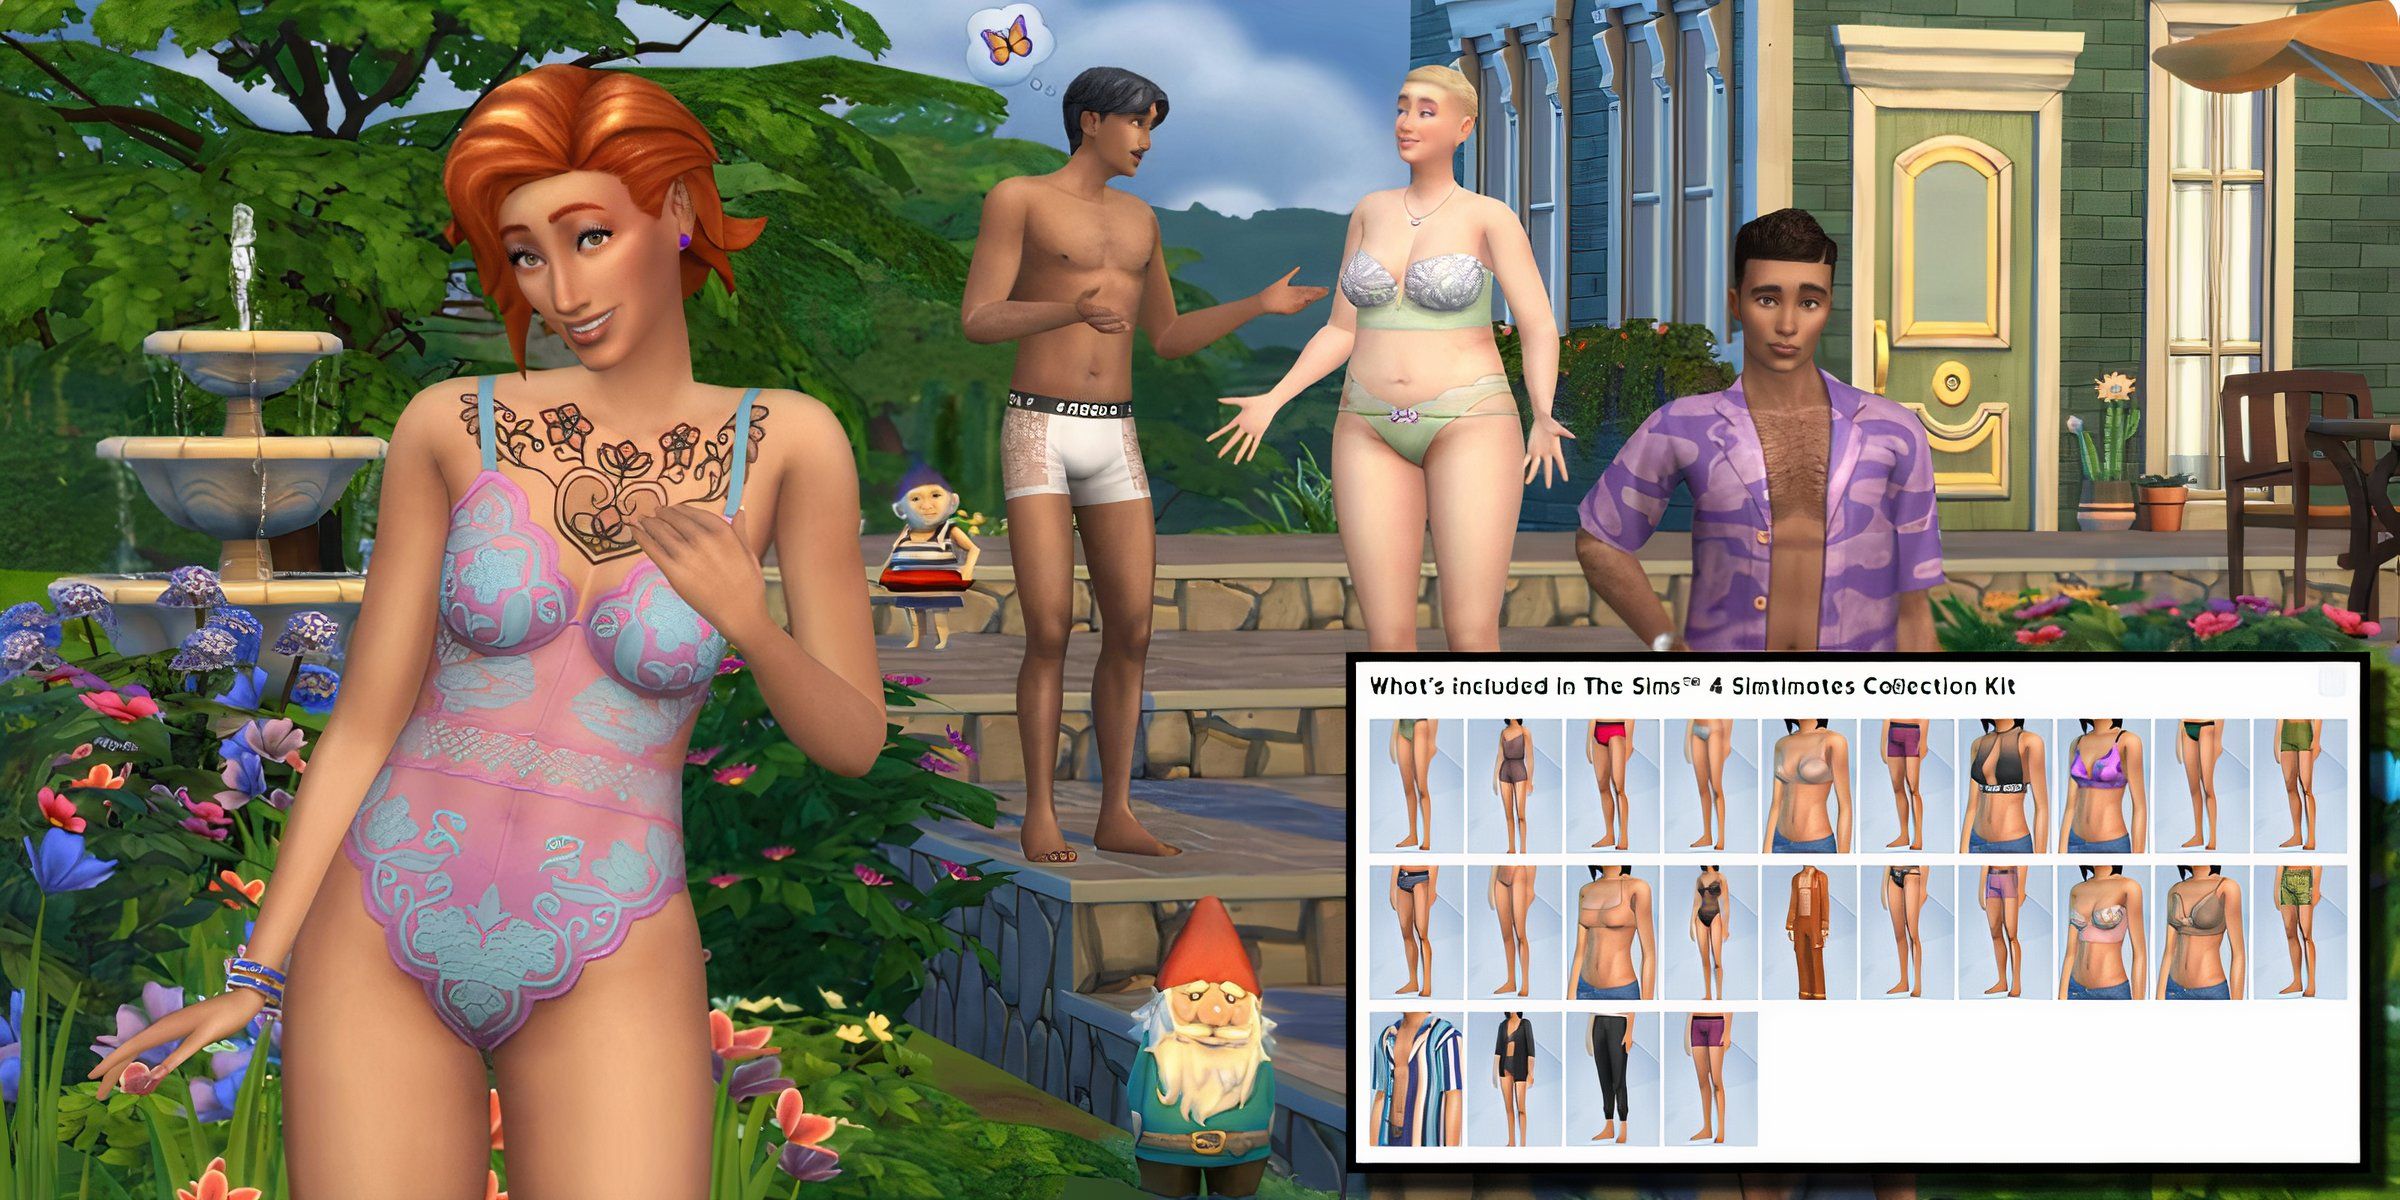 Examples of what is included in the Simtimates Collection Kit